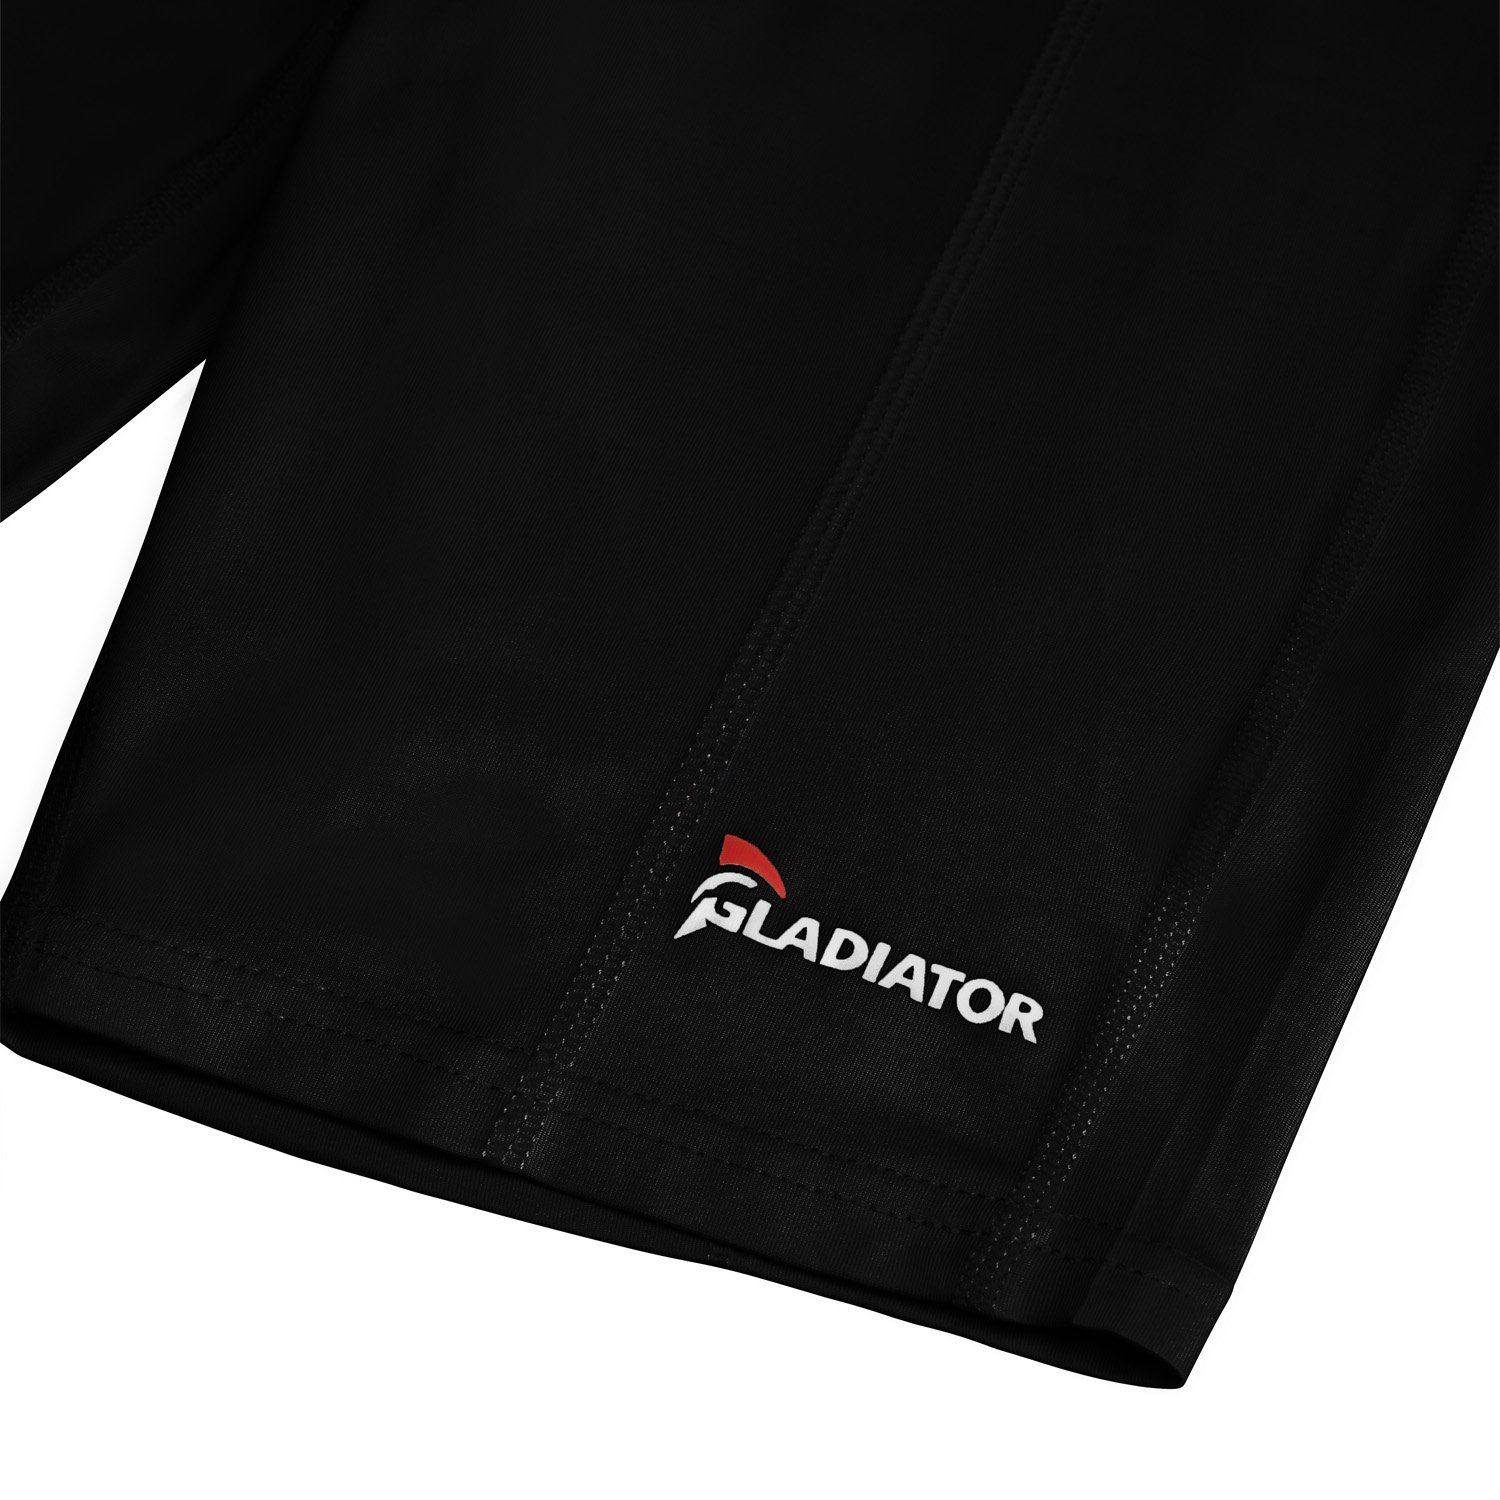 gladiator sports womens compression shorts in black detail photo logo